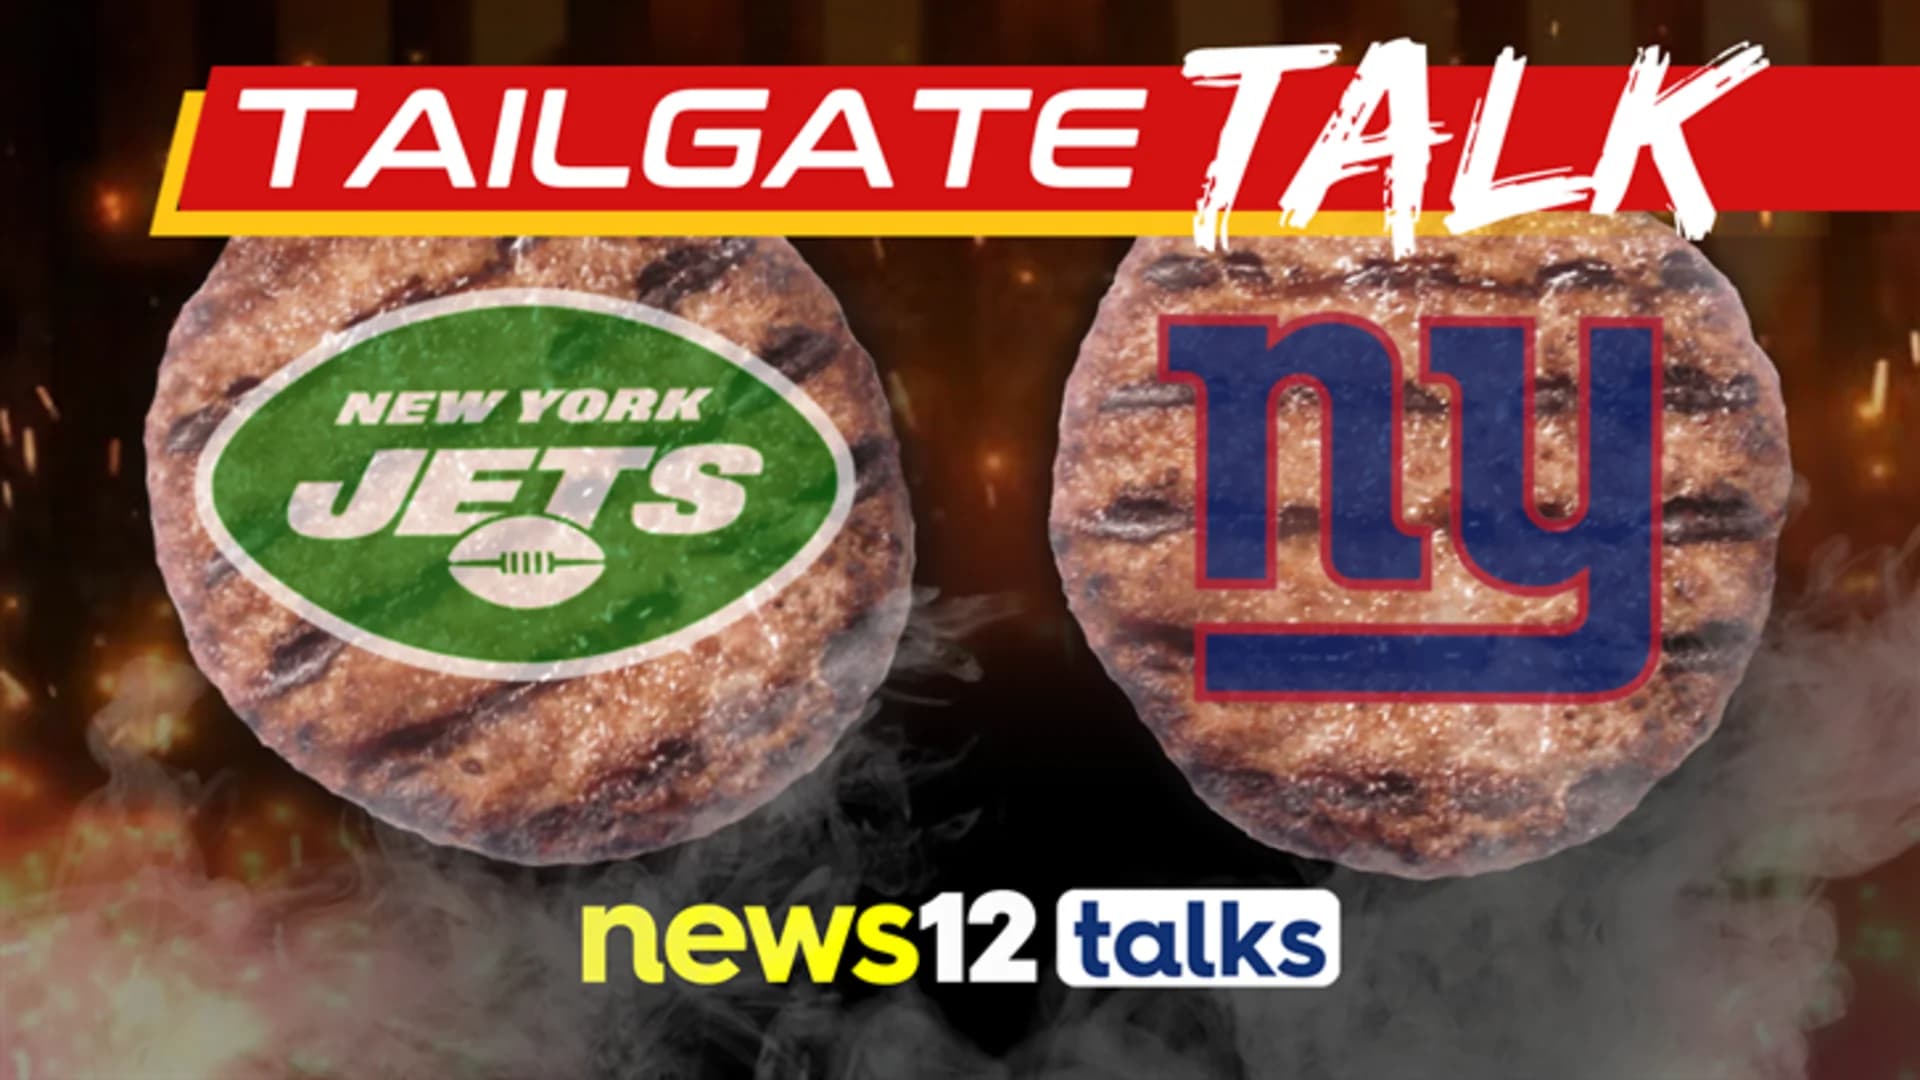 Jets & Giants Tailgate Talk podcast: Anthony Becht on the Jets' future - listen here